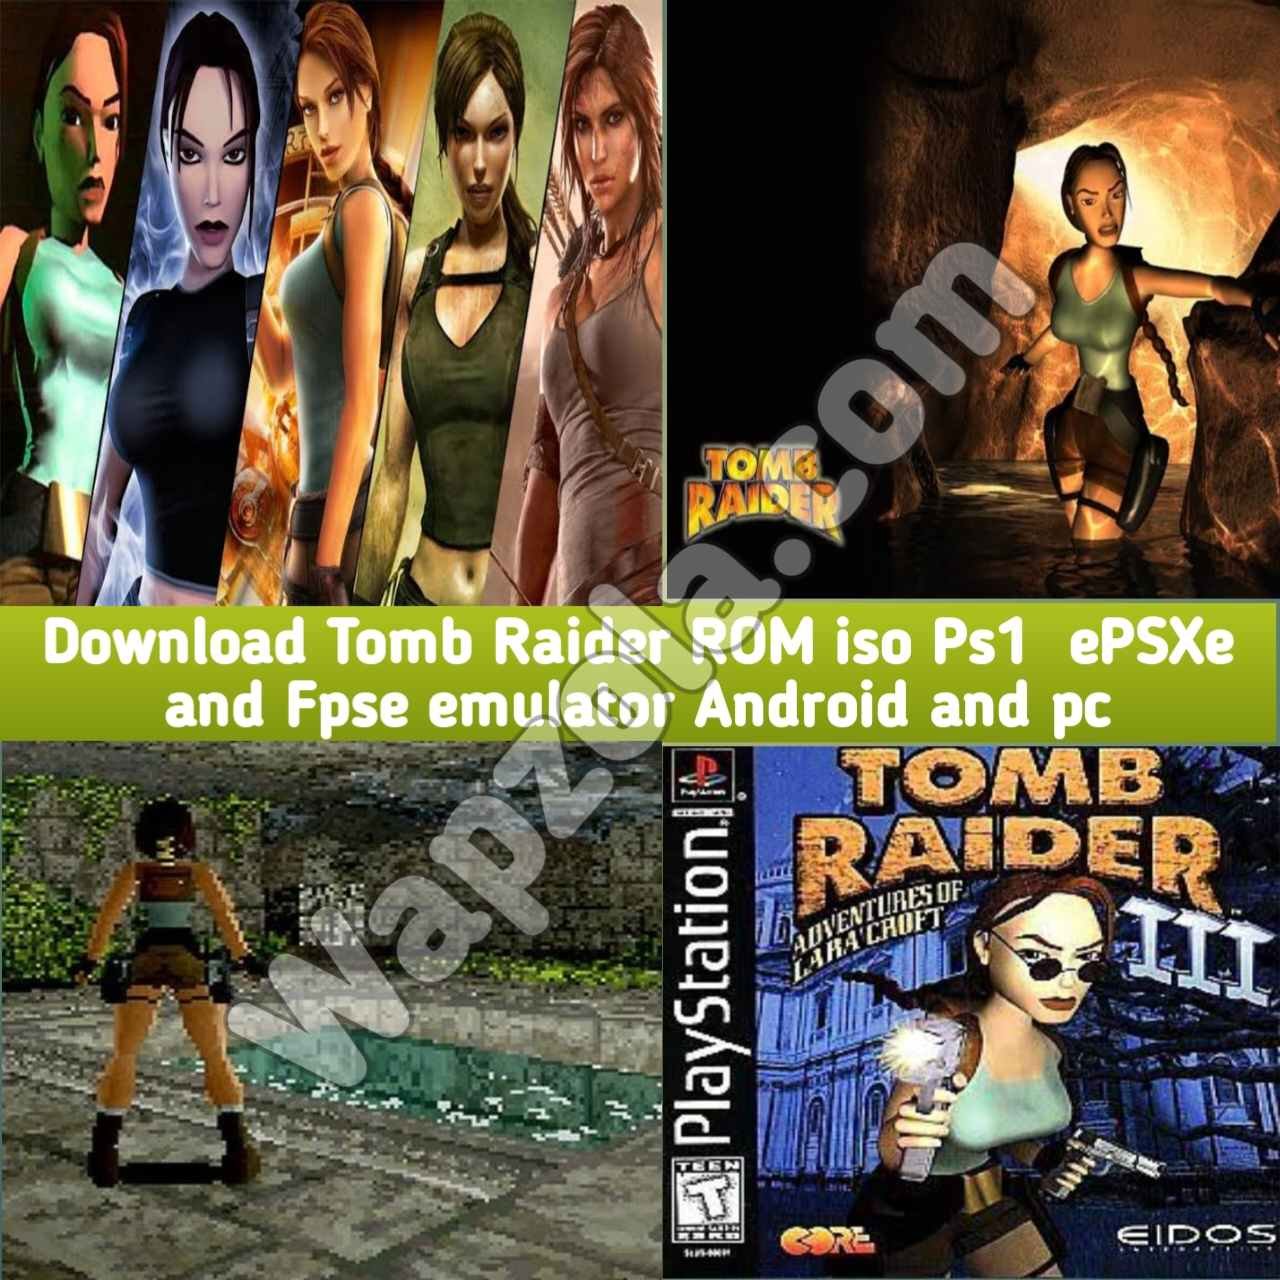 You are currently viewing [Download] Tomb Raider ROM (ISO) ePSXe and Fpse emulator (15MB size) highly compressed – Sony Playstation / PSX / PS1 APK BIN/CUE play on Android and pc